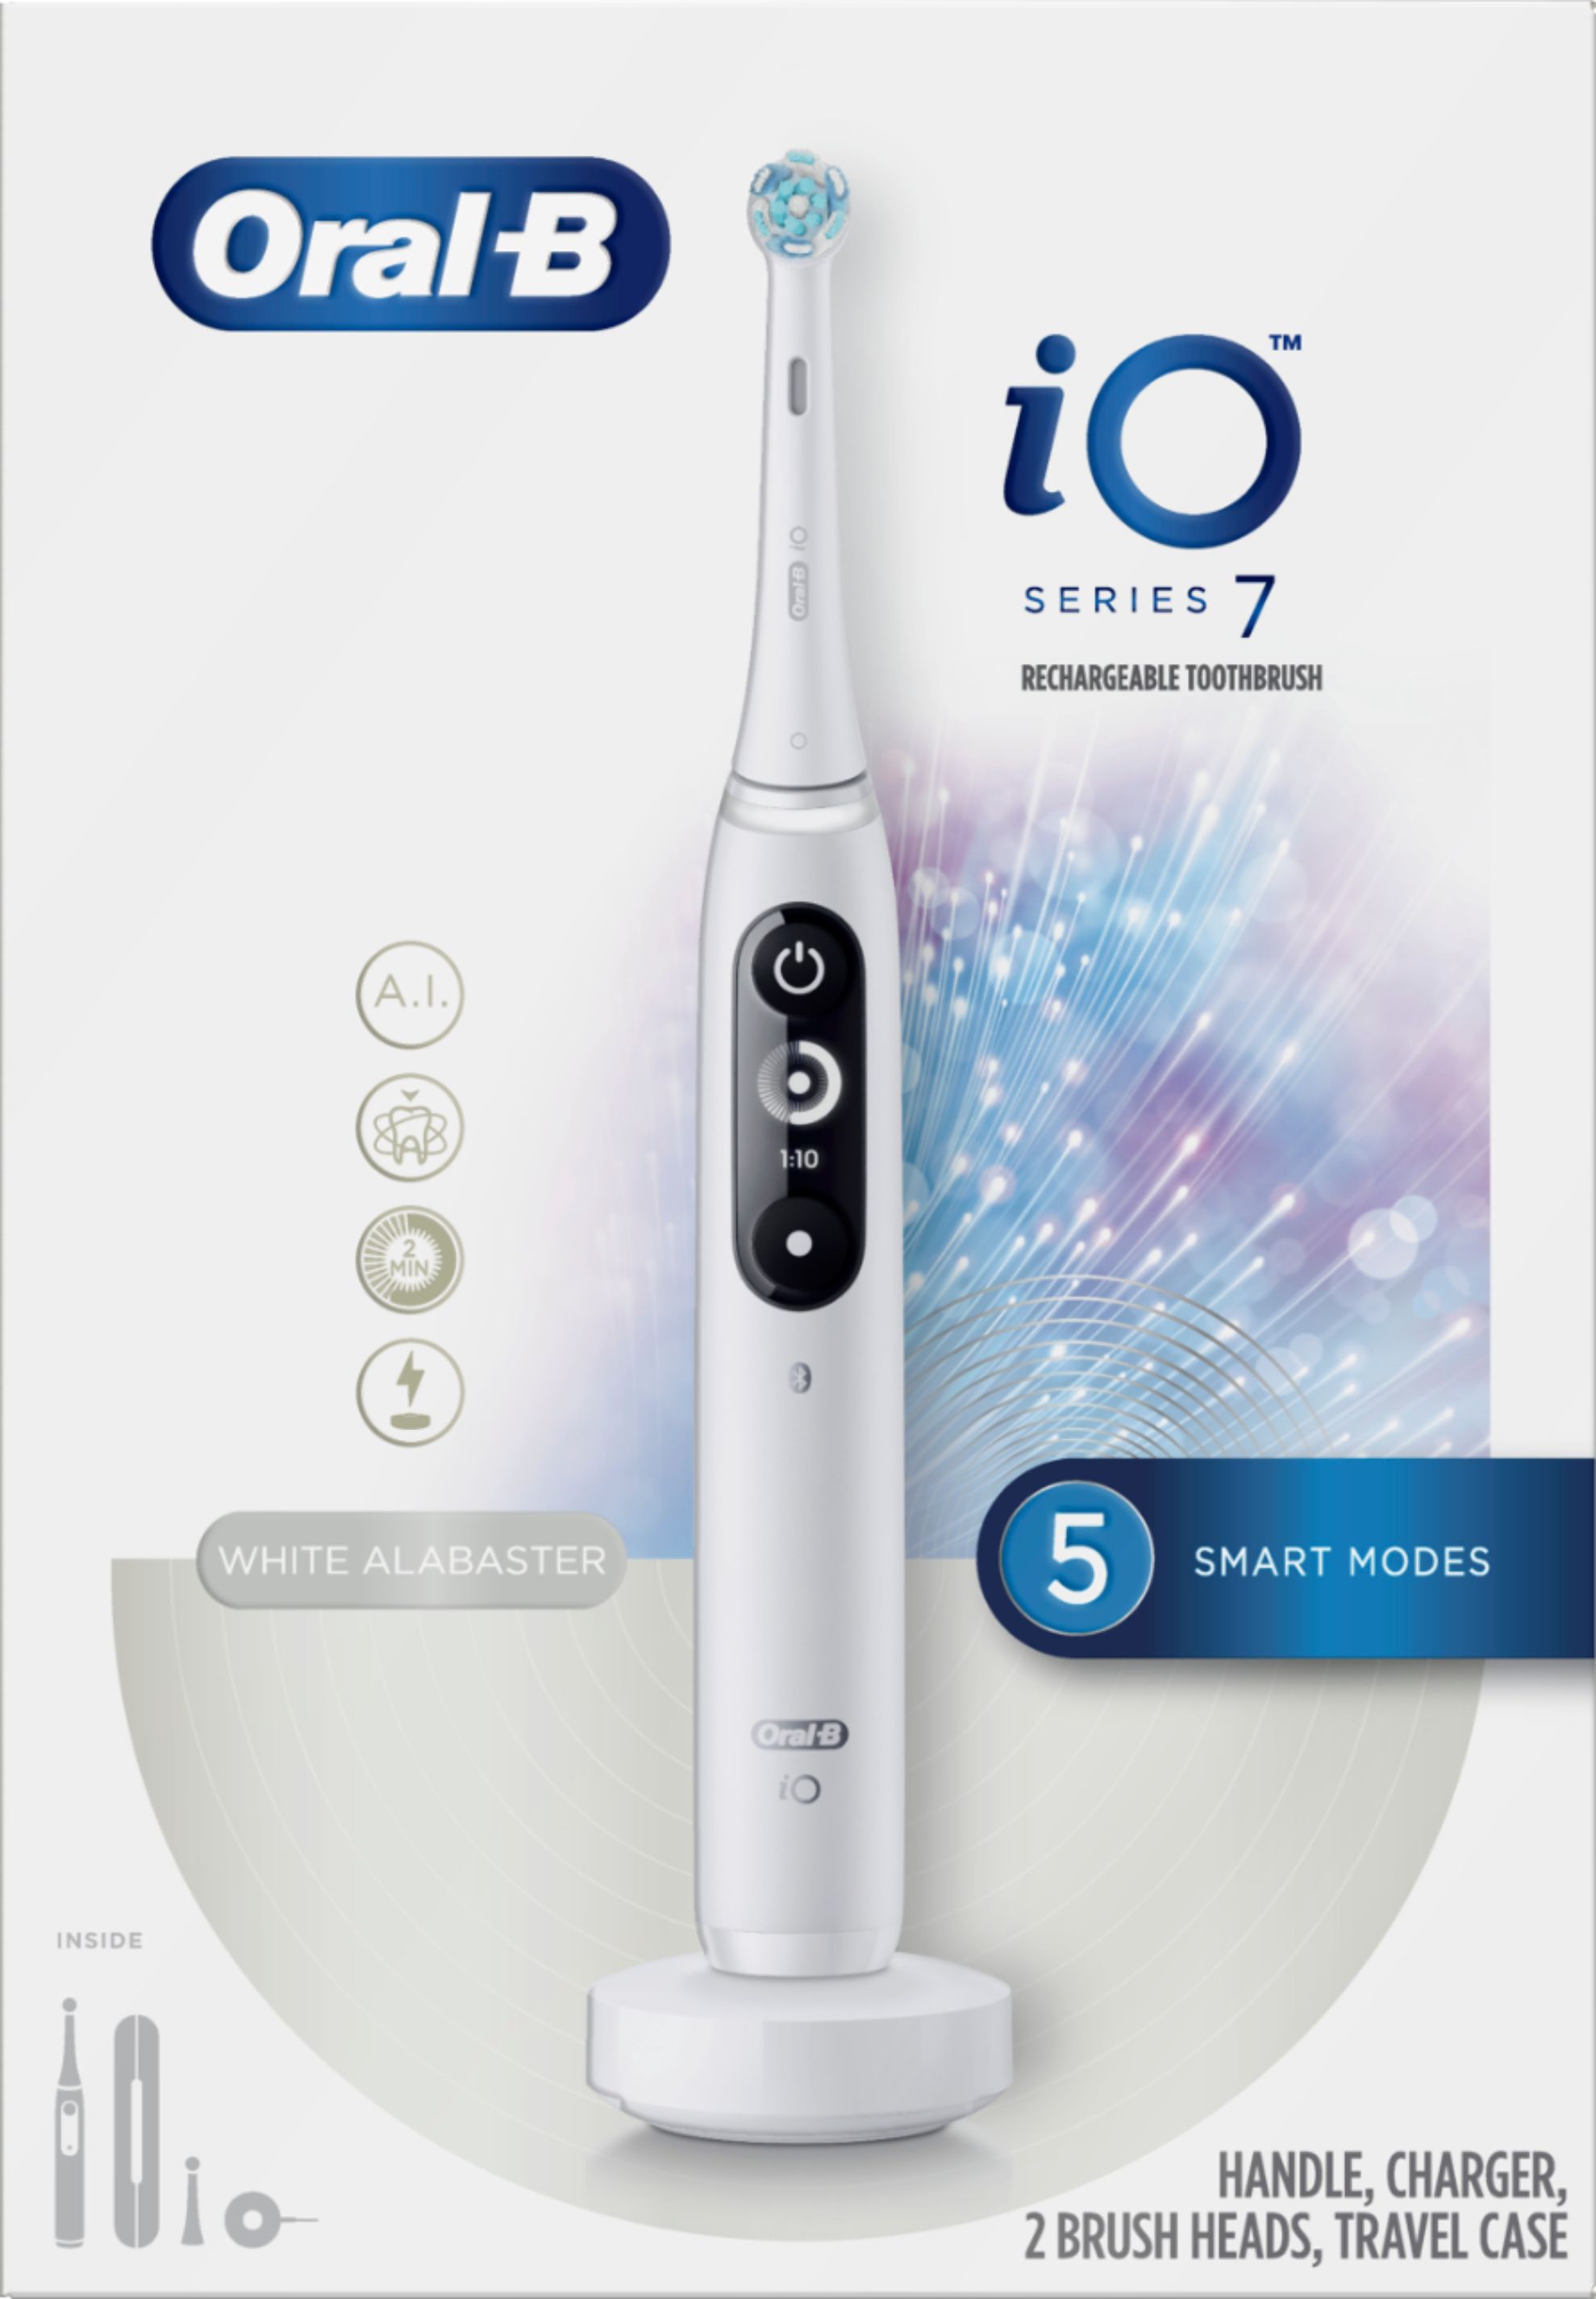 Oral-B - iO Series 7 Connected Rechargeable Electric Toothbrush - White Alabaster